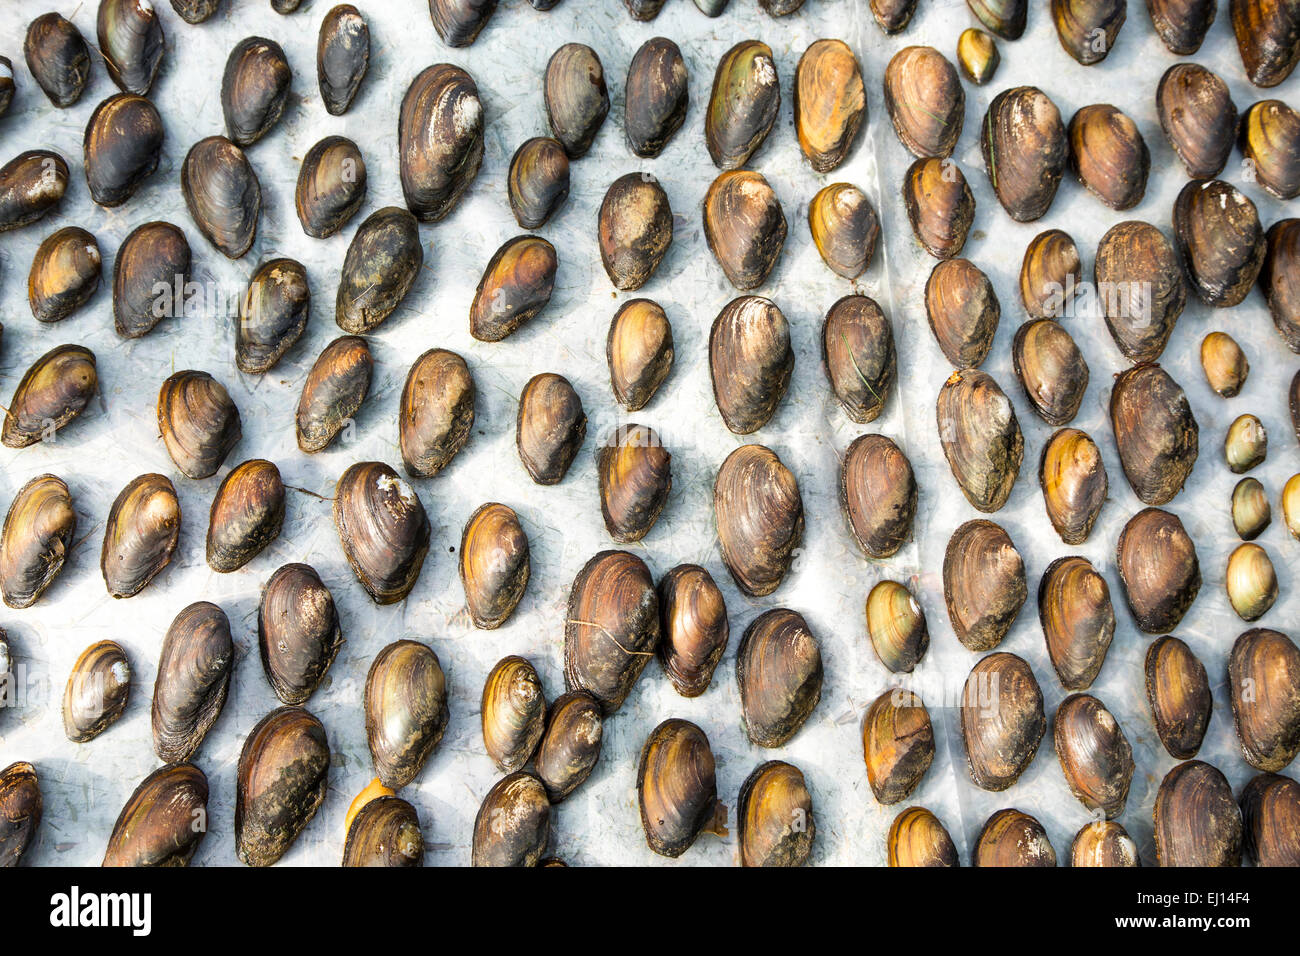 UK River mussels laid out Stock Photo